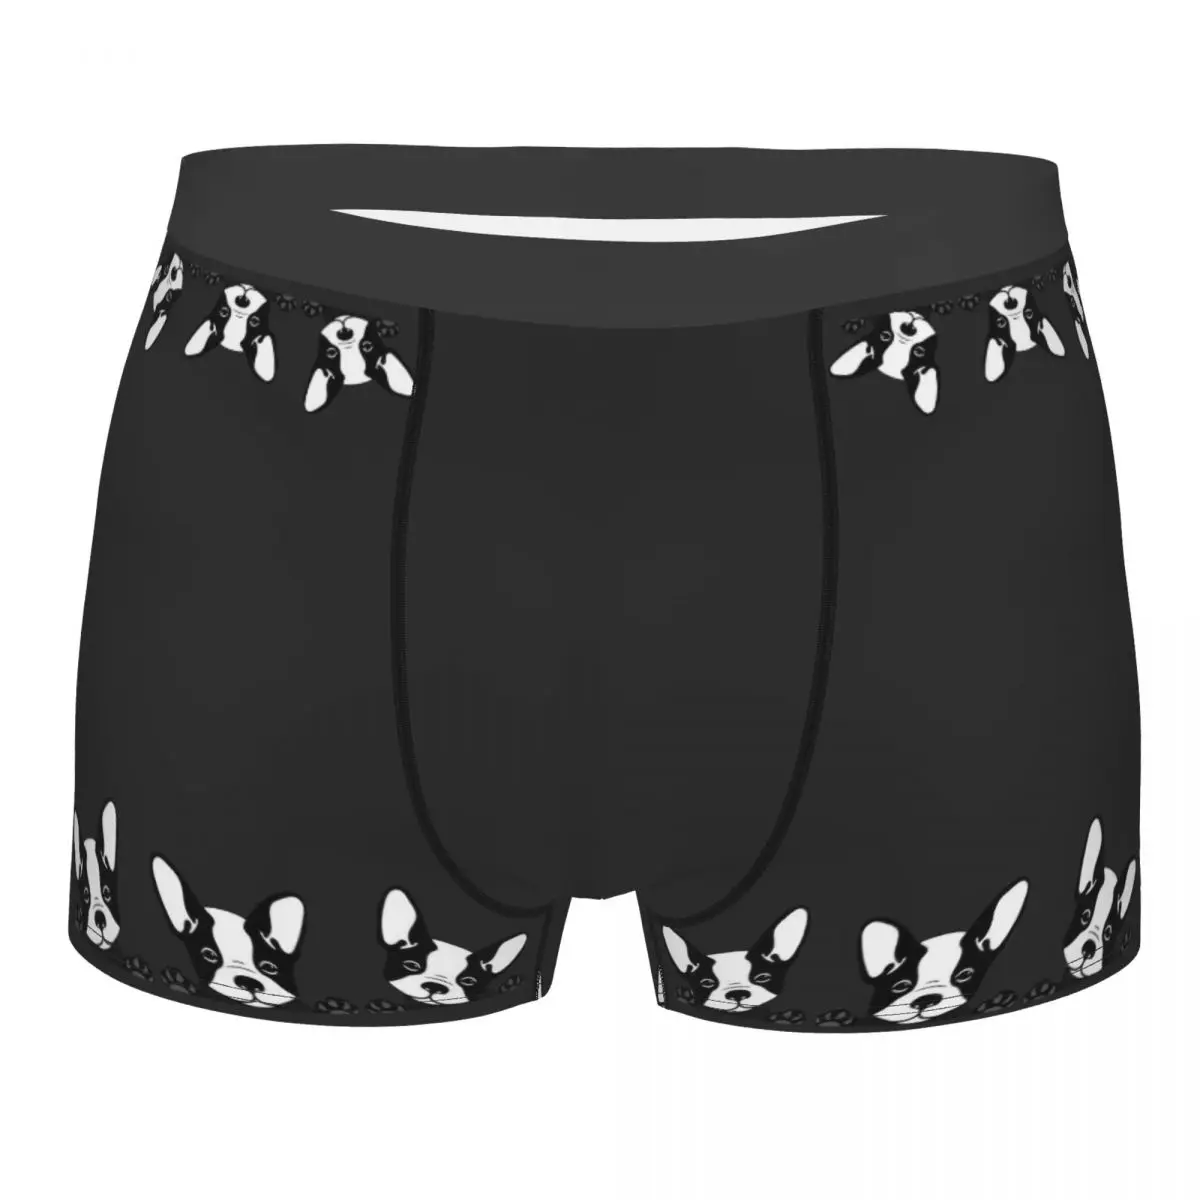 Kawaii Cute French Bulldog Puppy Men's Boxer Briefs special Highly Breathable Underpants Top Quality 3D Print Shorts Gift Idea pngtree farming tractor green men s boxer briefs special highly breathable underpants top quality 3d print shorts gift idea